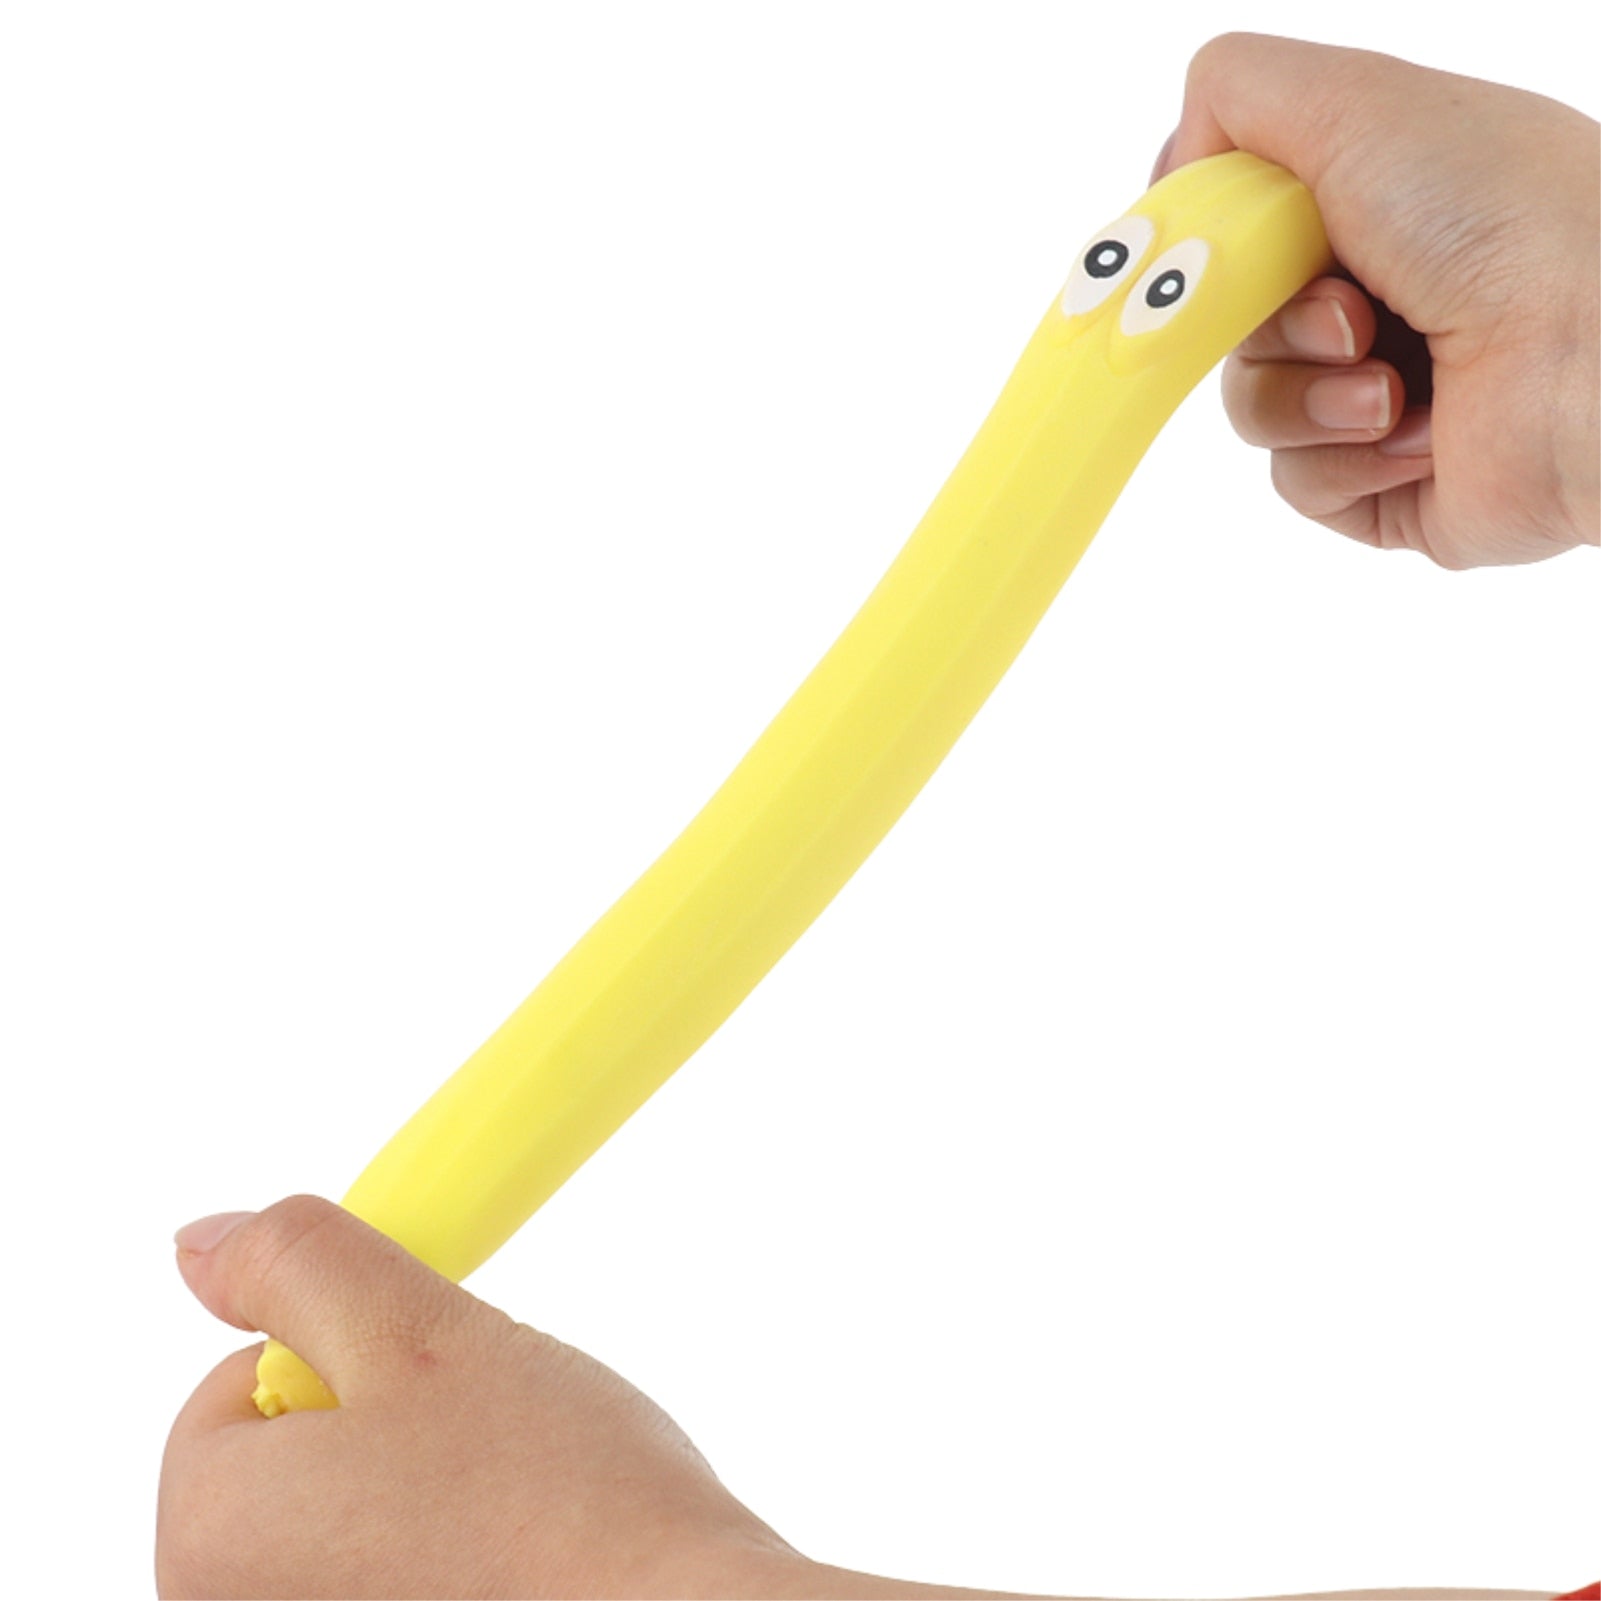 Squeezy Banana, Indulge in whimsical fun with this delightful Squeezy Banana toy, designed to provide laughter and stress relief. This amusing banana toy is not just comical but also incredibly relieving and soothing to the senses, making it a must-have for both children and adults. Features of the Squeezy Banana: Tactile Sensation: Offers a remarkably soft and tactile experience that is irresistibly pleasurable to hold. Stress-Relieving: Squeezing and stretching this banana can alleviate stress and enhance